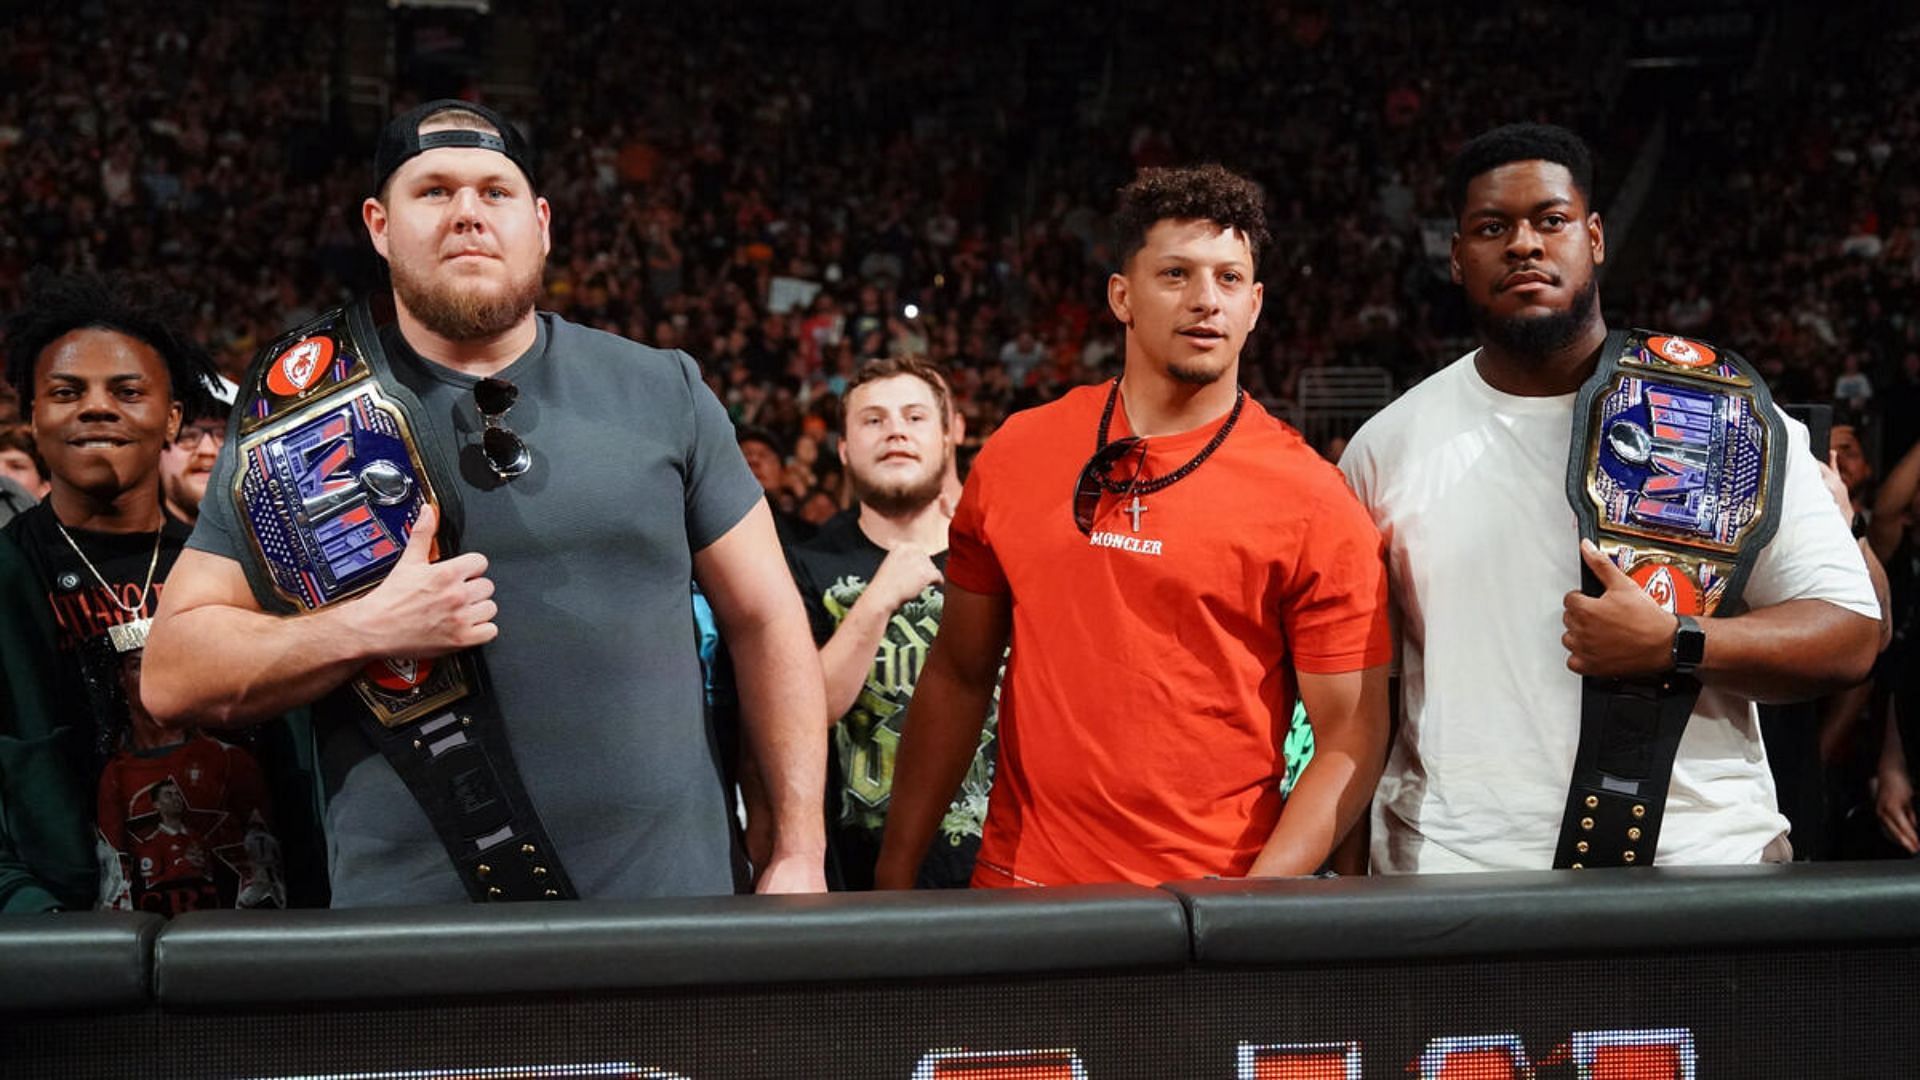 Patrick Mahomes made quite the appearance on RAW